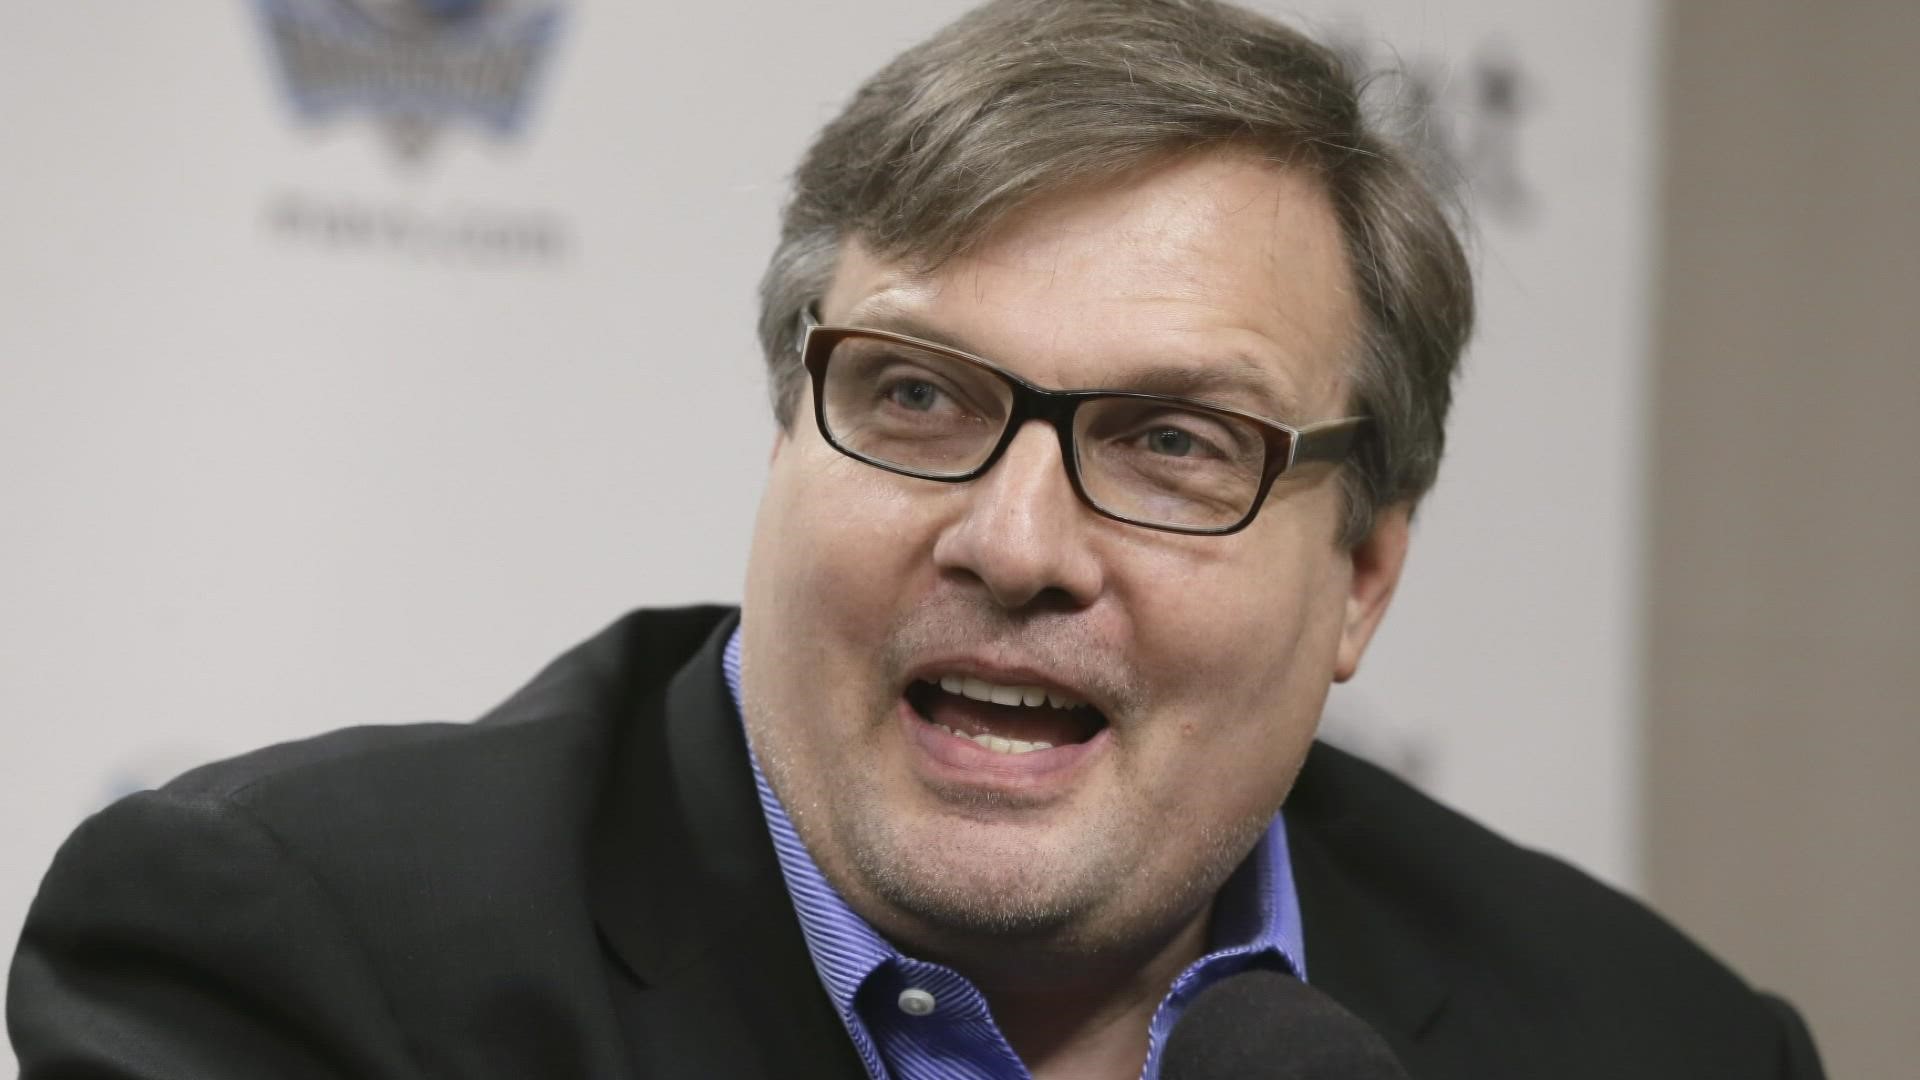 Donnie Nelson believes he was fired in retaliation for reporting to Mark Cuban that a high-level Mavericks executive sexually harassed and sexually assaulted someone